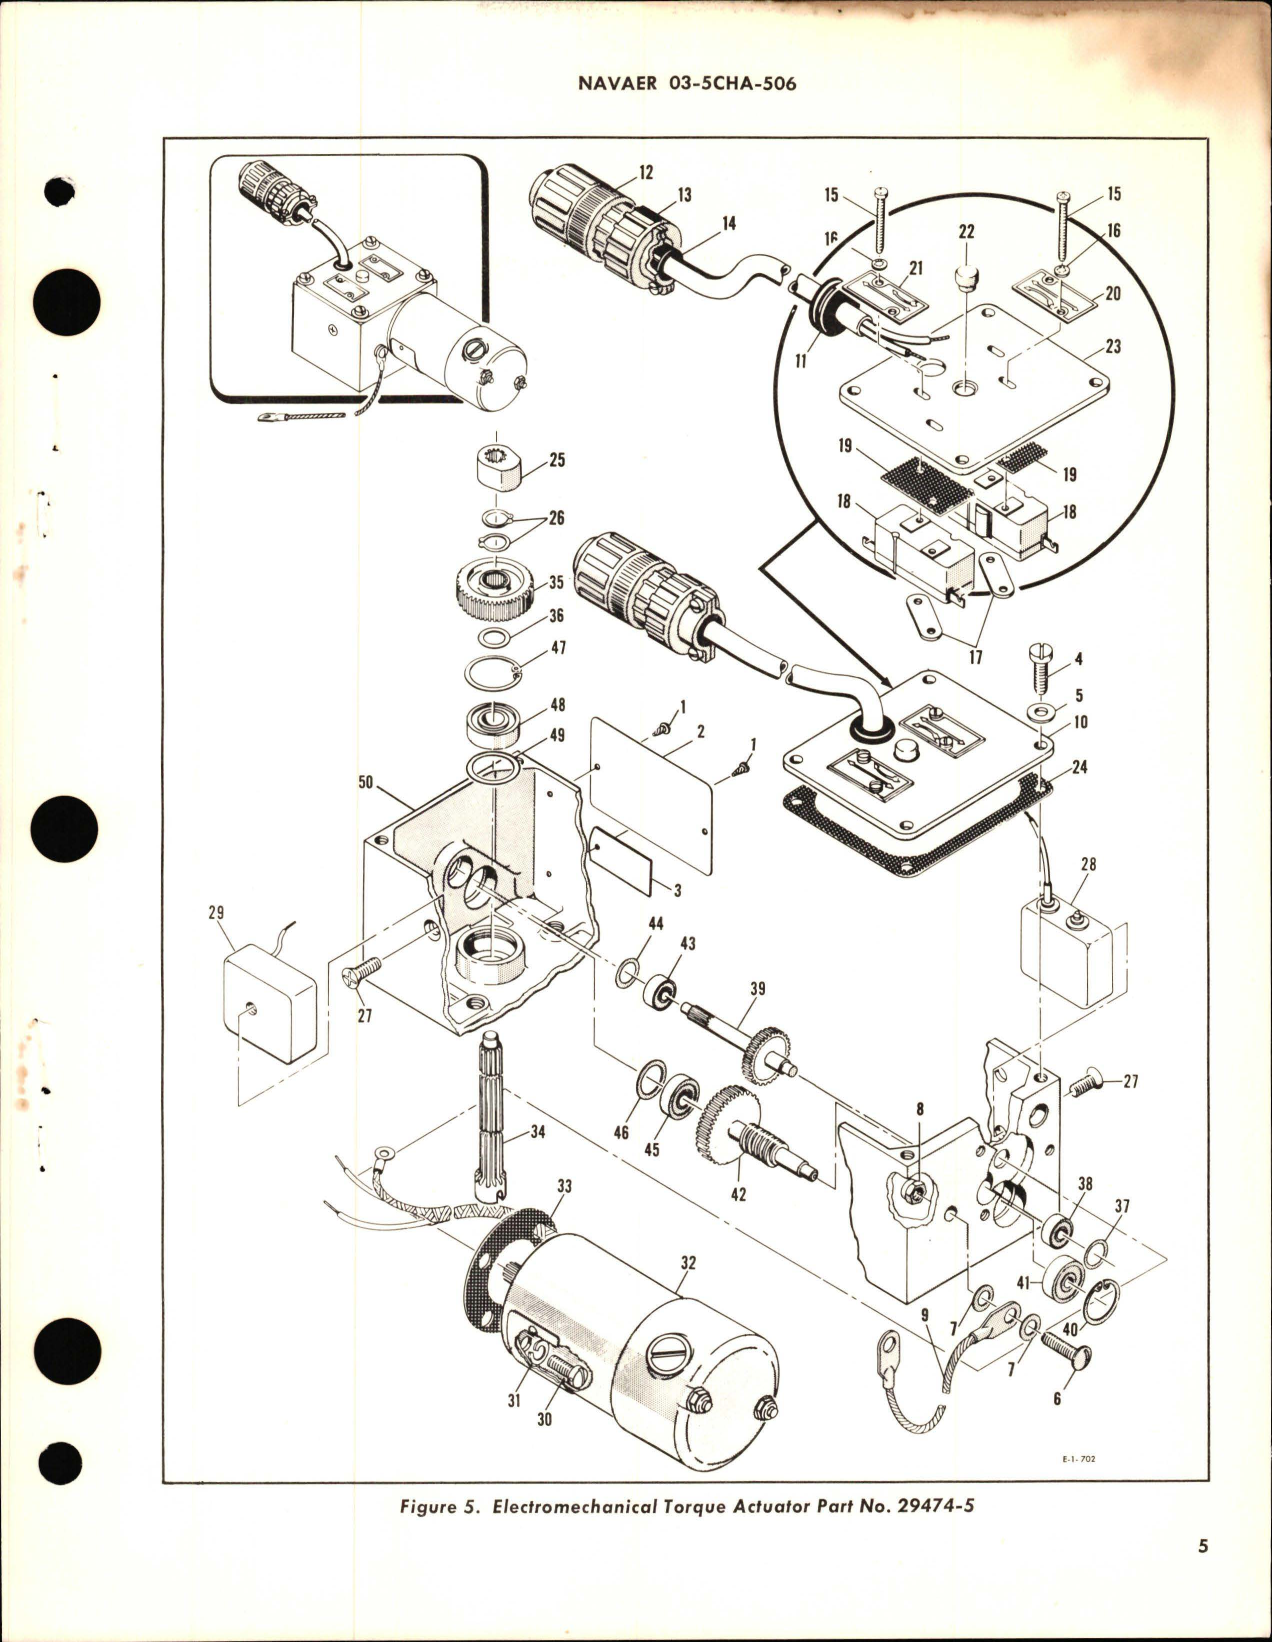 Sample page 5 from AirCorps Library document: Overhaul Instructions with Parts Breakdown for Electromechanical Torque Actuator - Part 29474-5 - Model ETA05-156-1